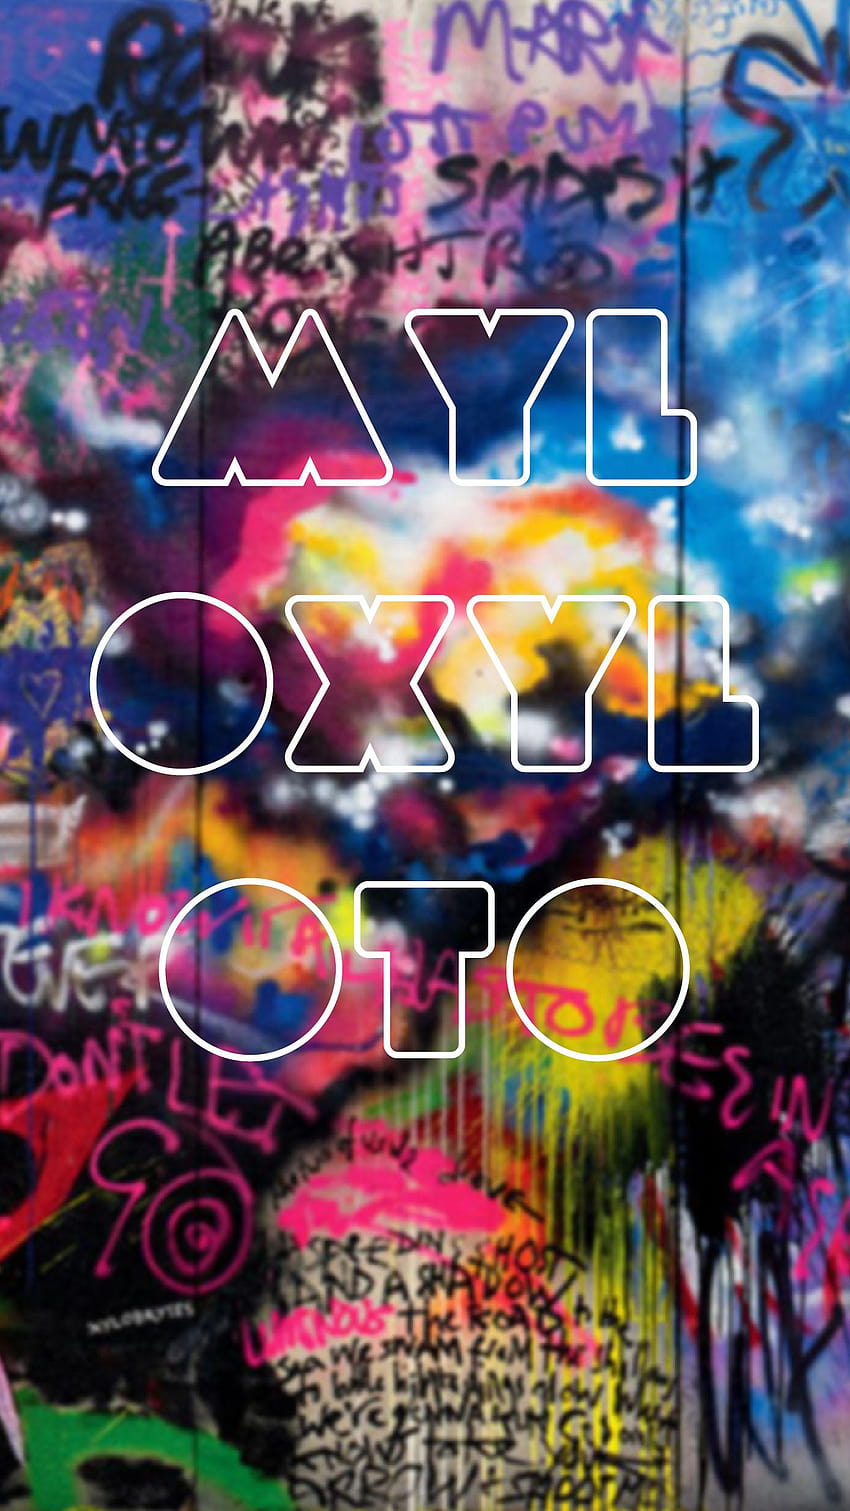 Hello again! Based on the suggestions from my previous post, here, mylo xyloto HD phone wallpaper